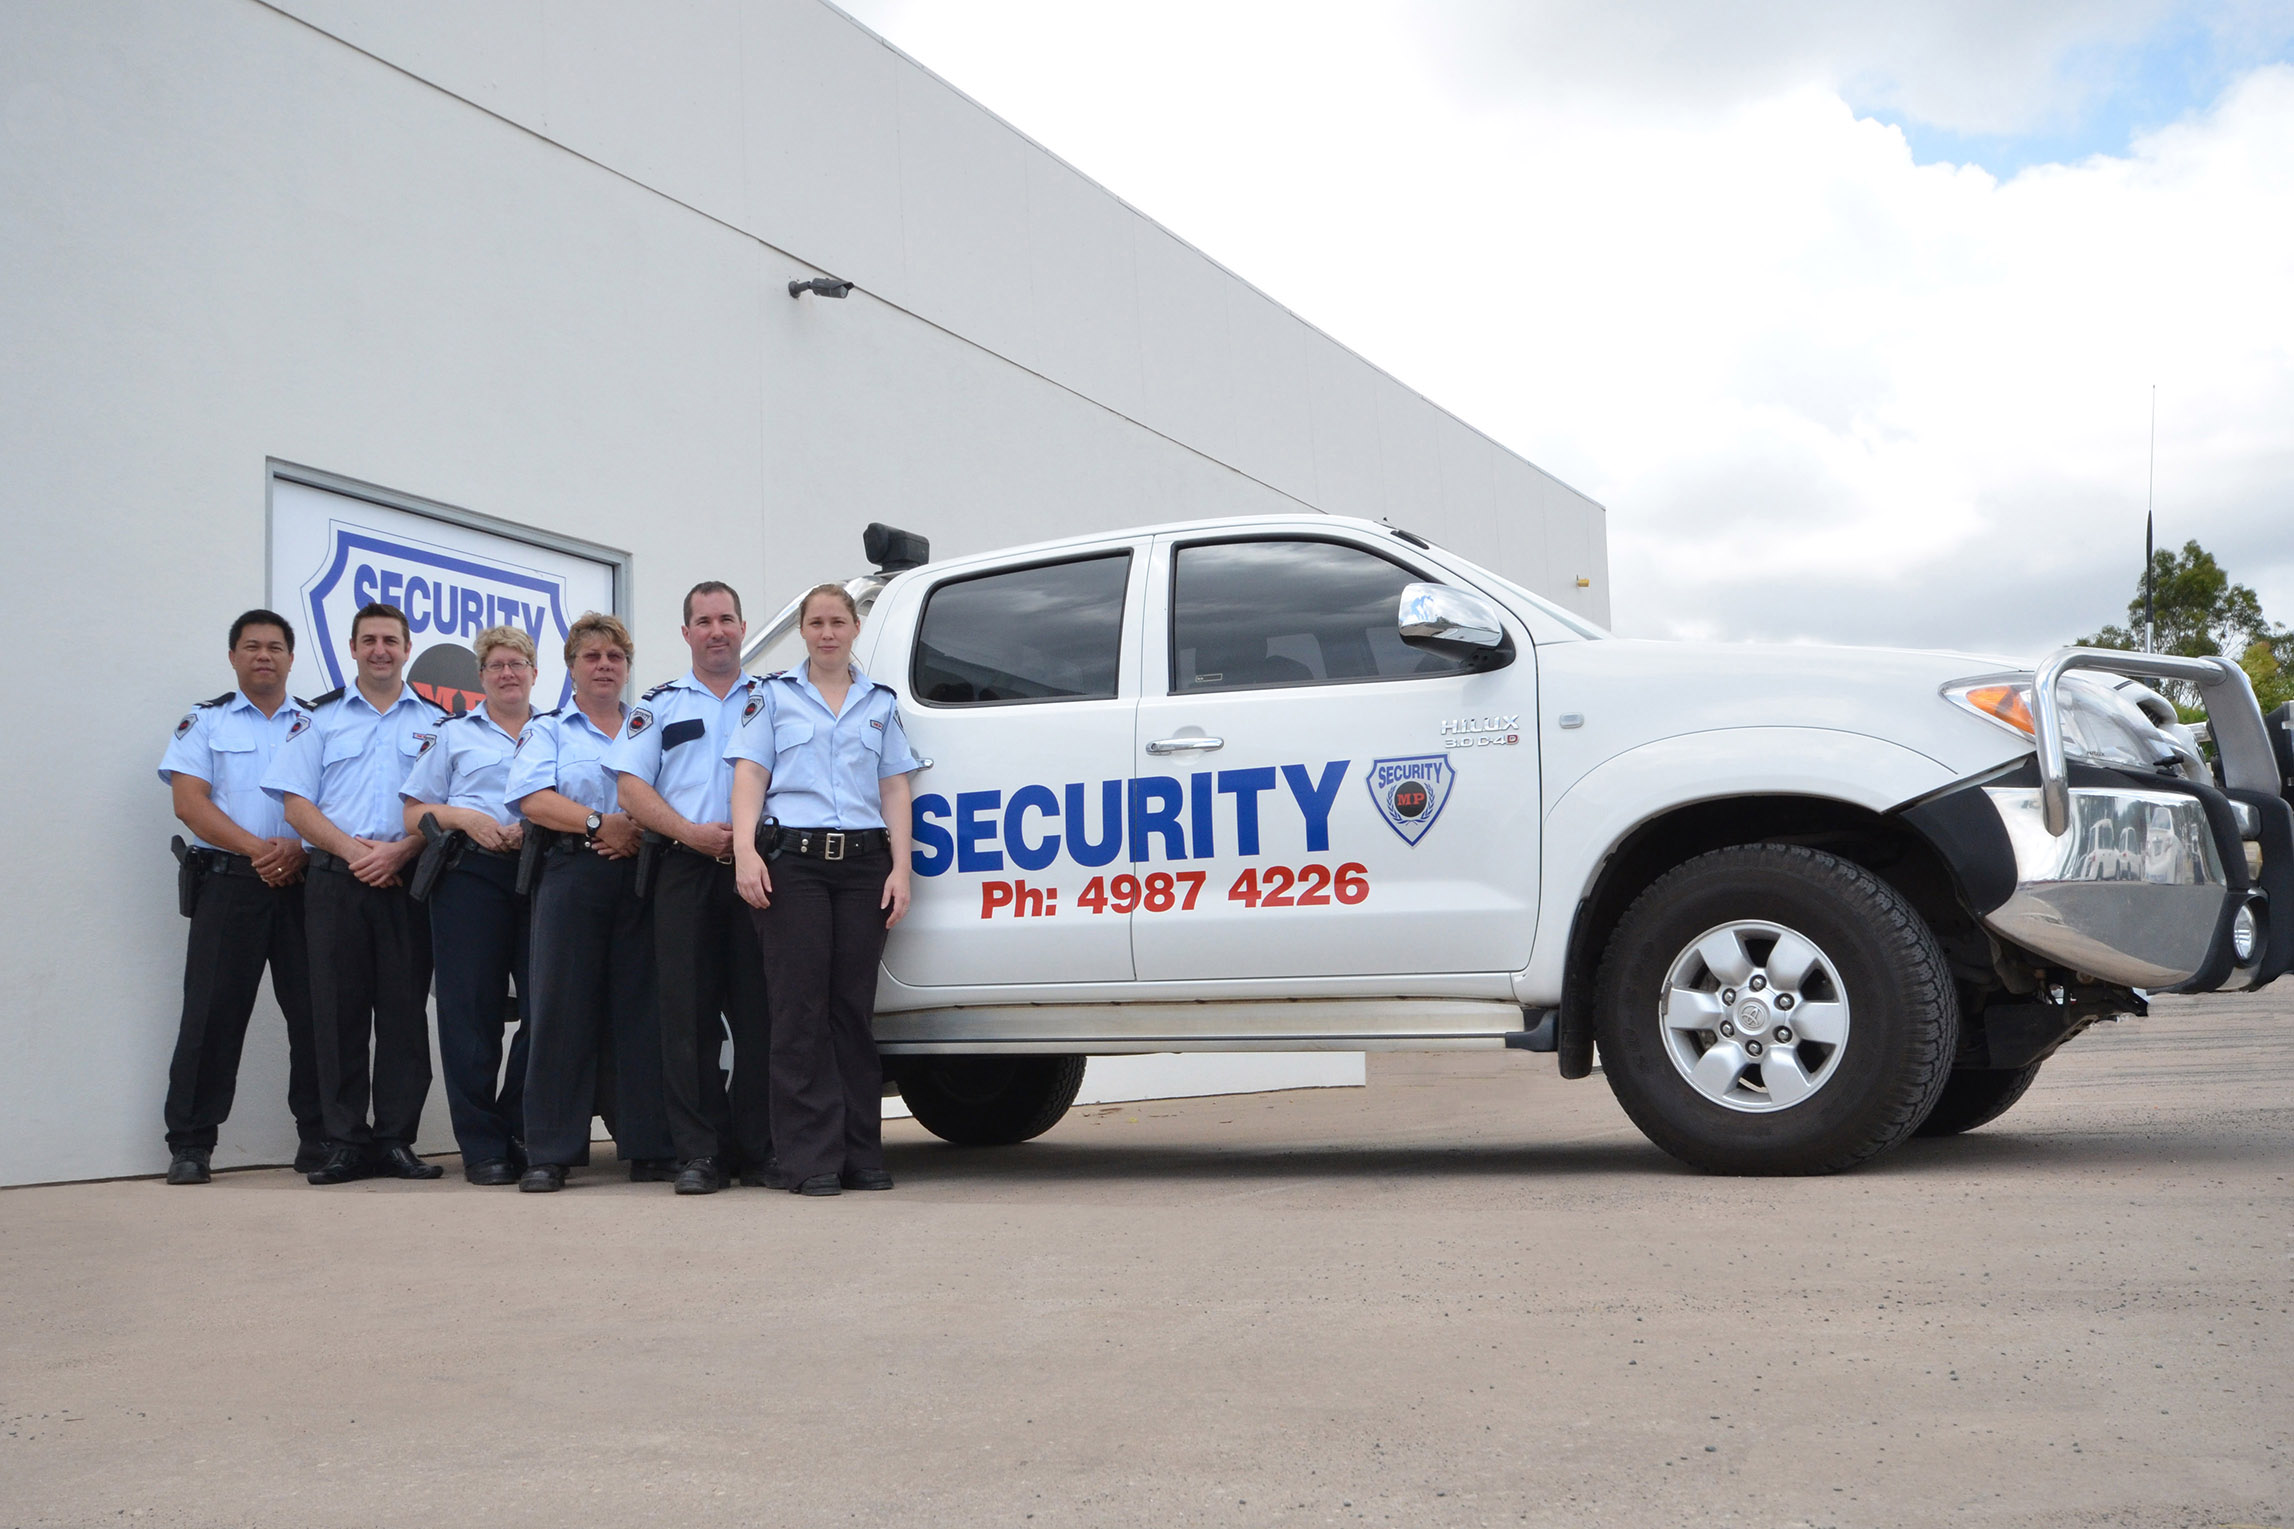 Security-Services-005.jpg